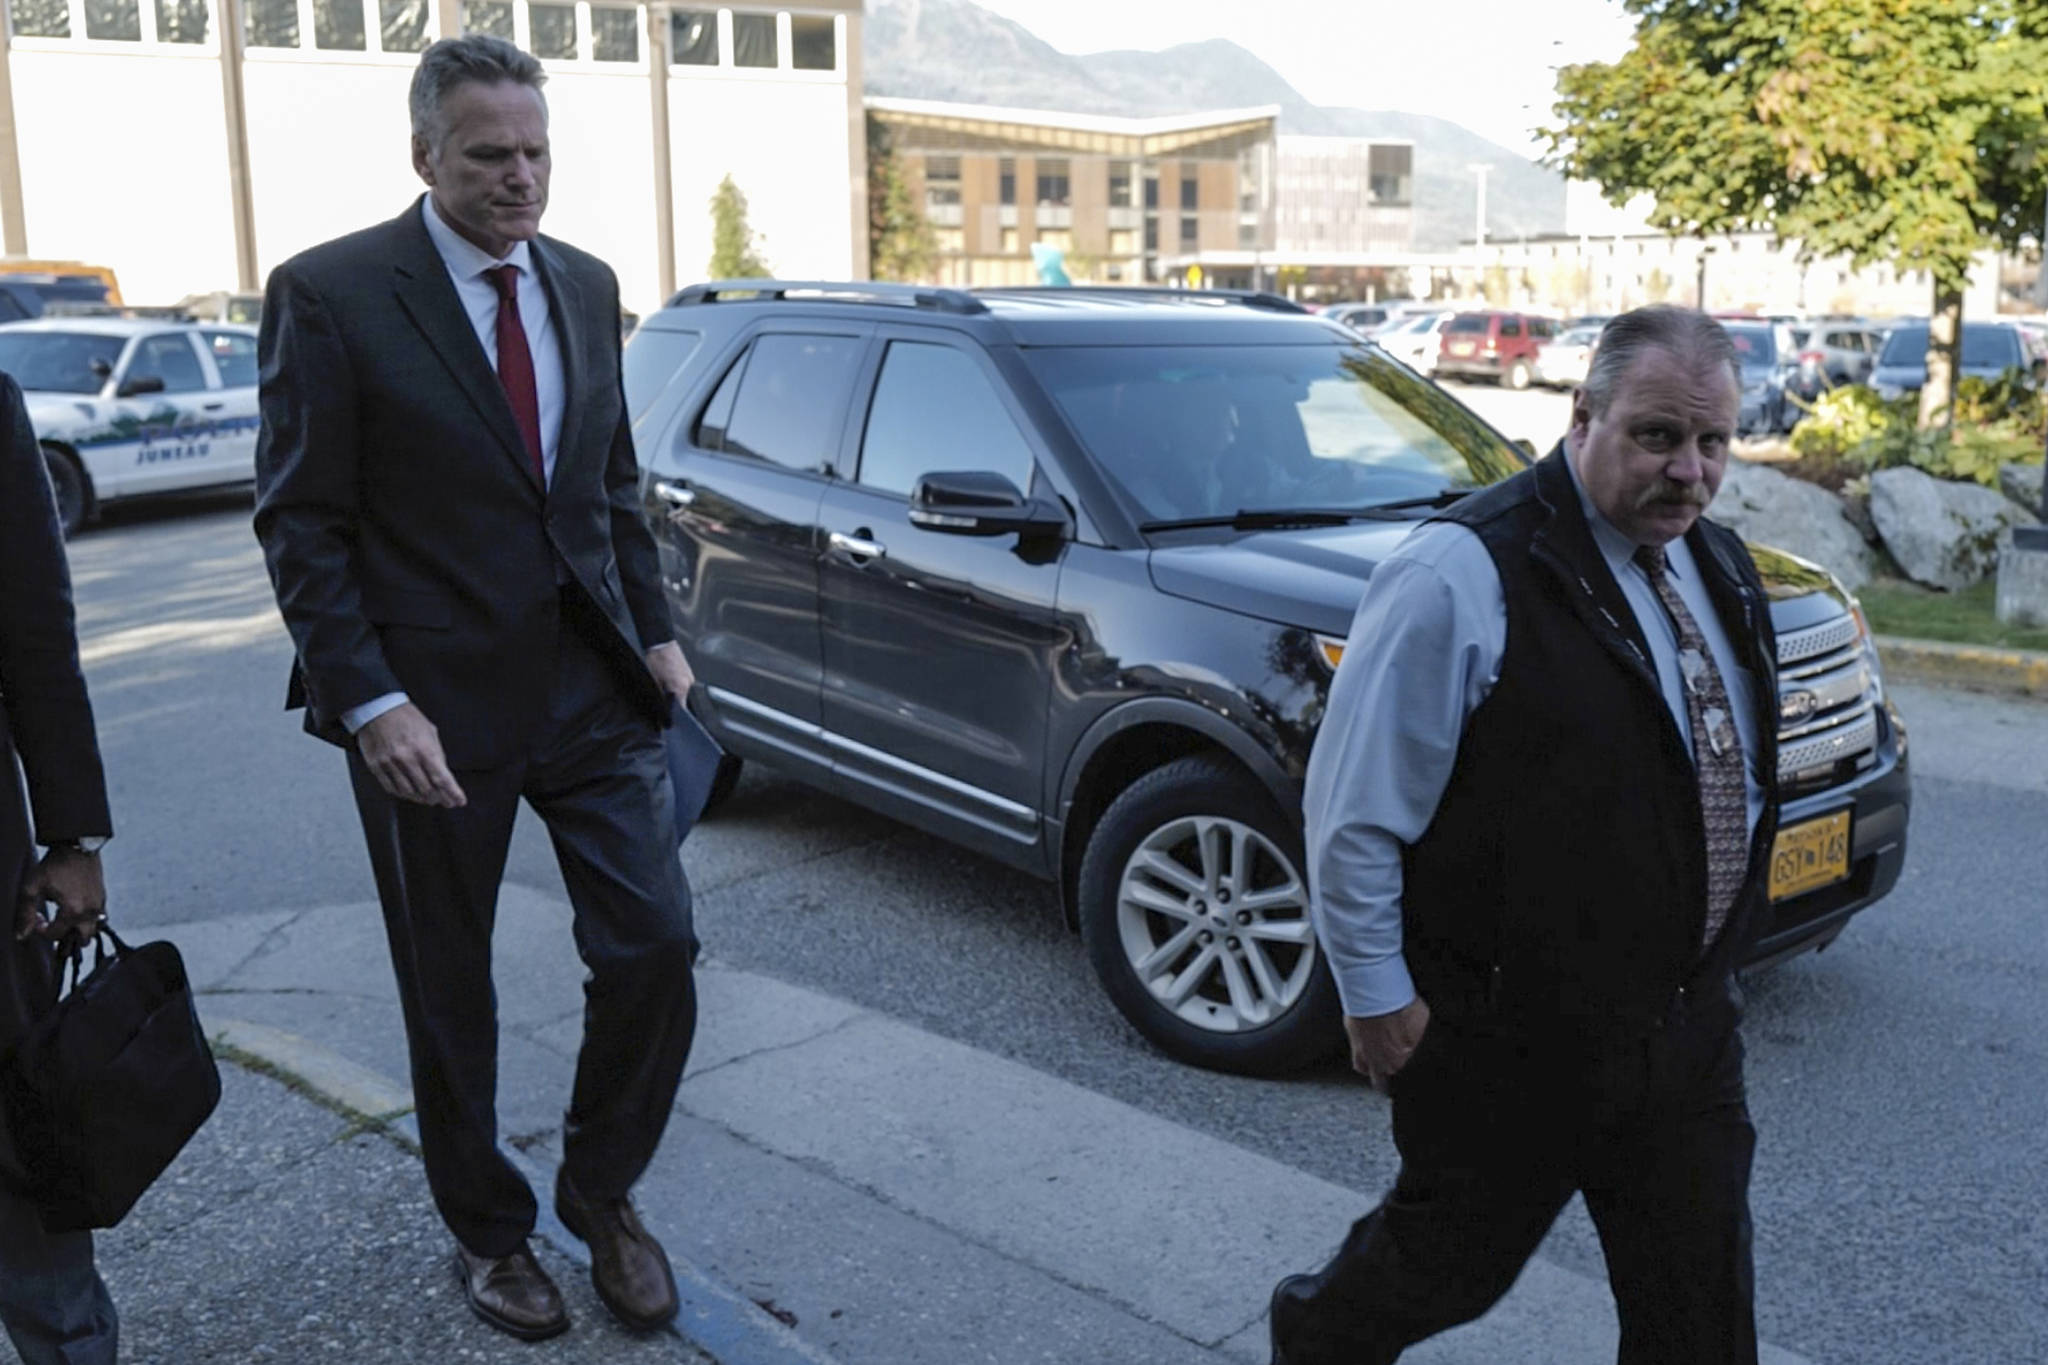 Gov. Mike Dunleavy arrives at Centennial Hall on Tuesday, Sept. 10, 2019, to attend the first day of the 11th annual meeting of the International Forum of Sovereign Wealth Funds. The Alaska Permanent Fund Corporation is the host of the event. (Michael Penn | Juneau Empire)